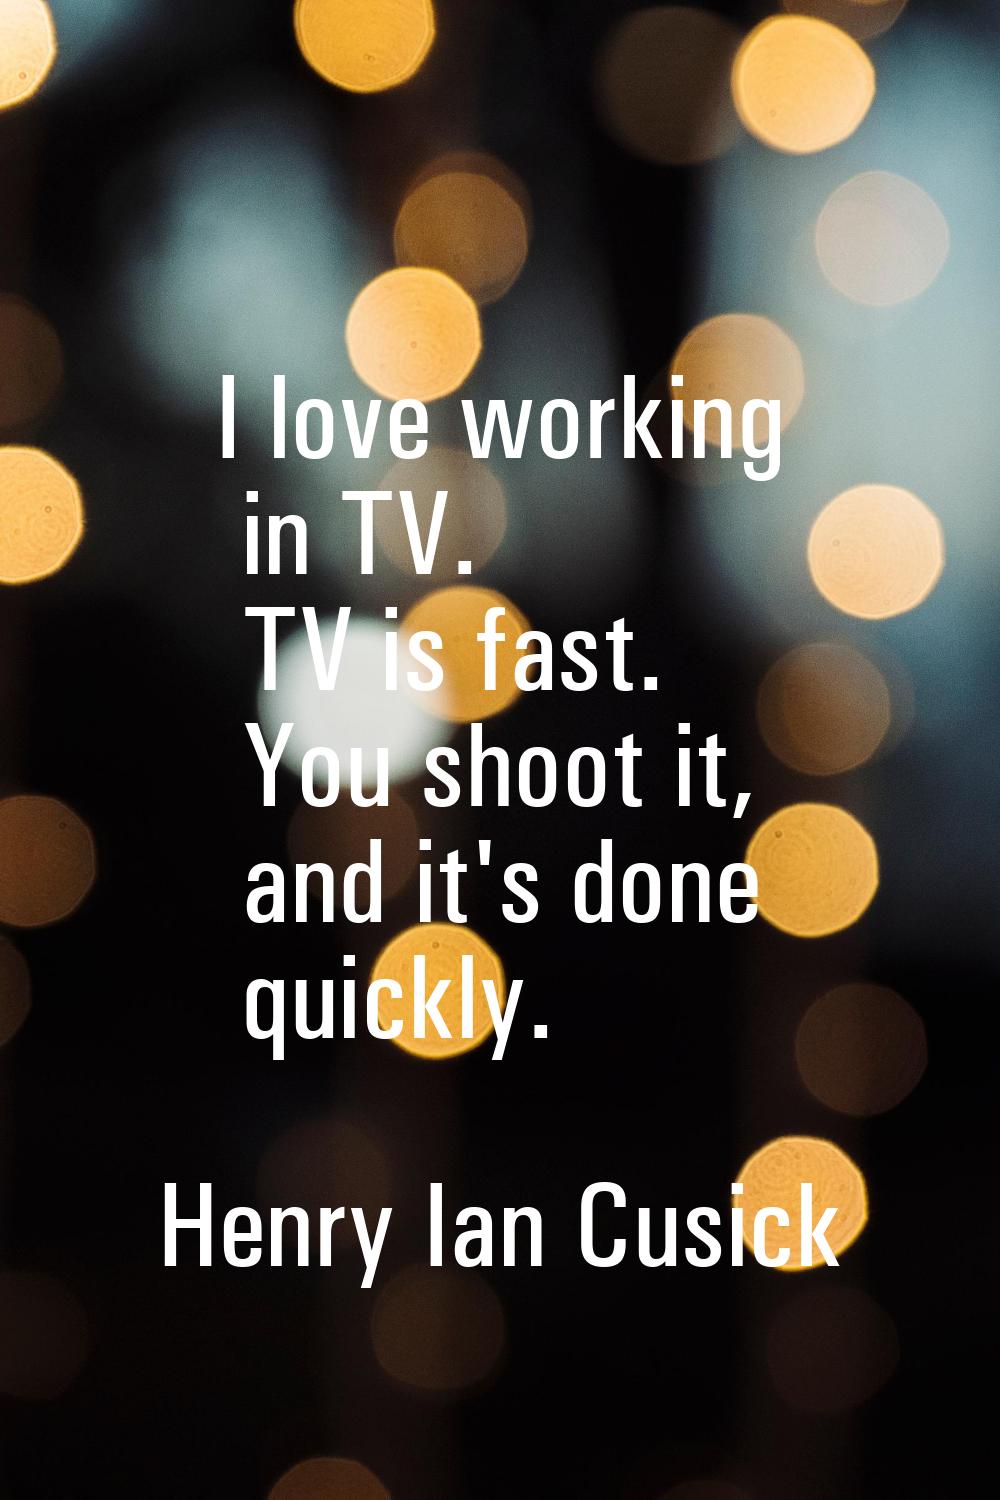 I love working in TV. TV is fast. You shoot it, and it's done quickly.